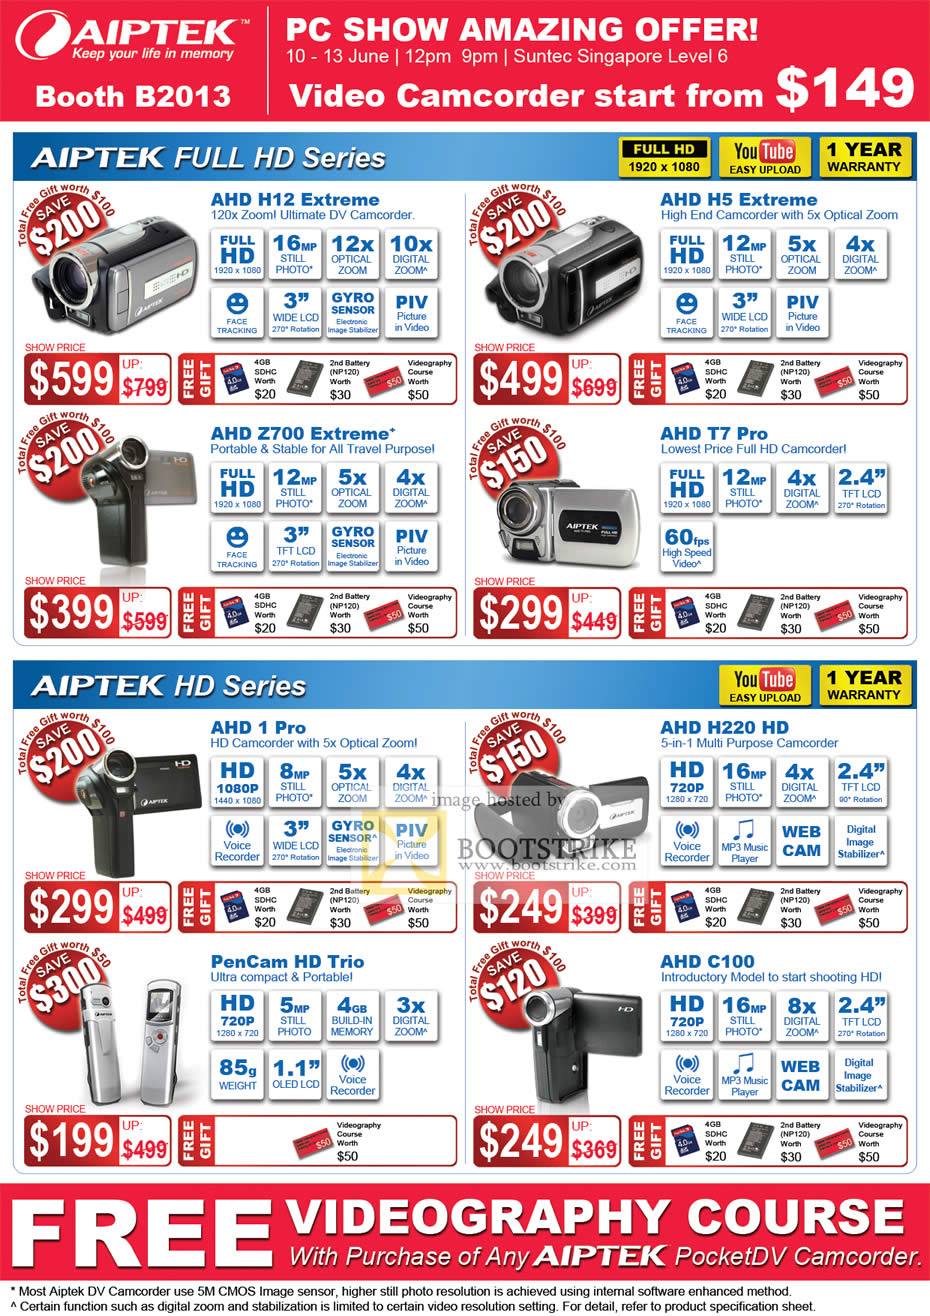 PC Show 2010 price list image brochure of IKnow Aiptek Camcorders AHD H12 Extreme Z800 H5 T7 Pro 1 Pro H220 HD PenCam Trio C100